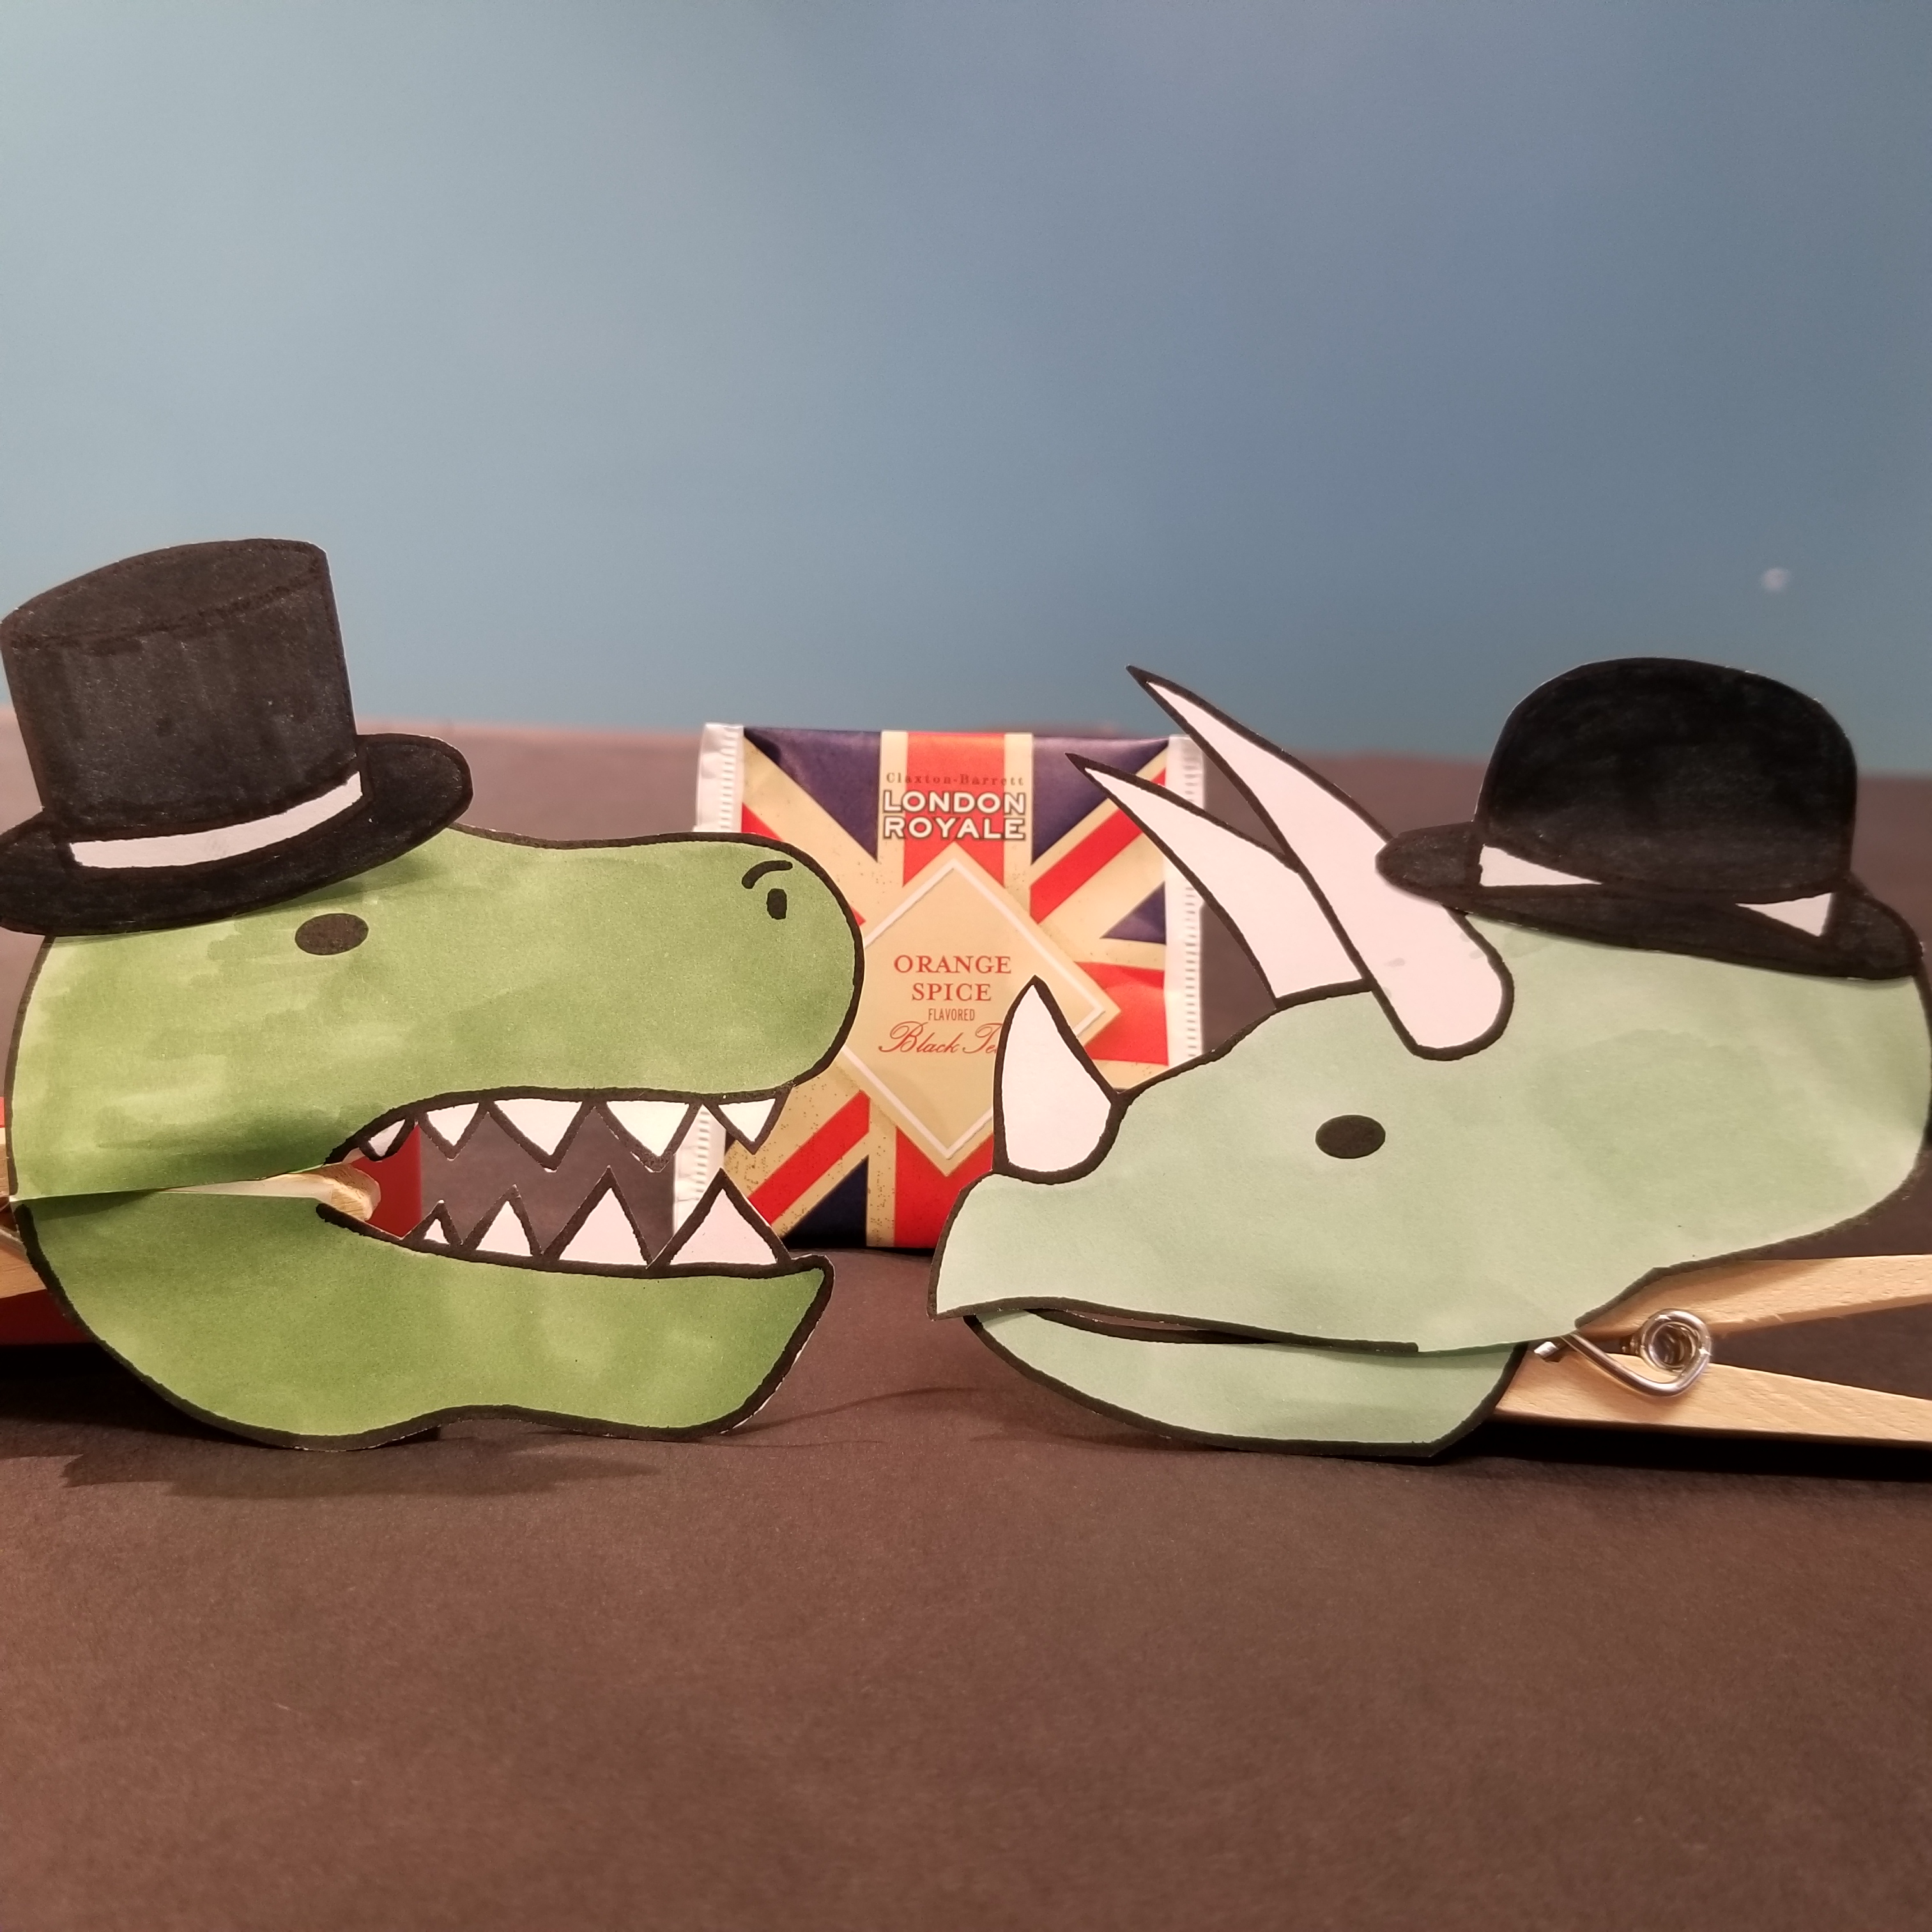 Dinosaurs in hats with tea